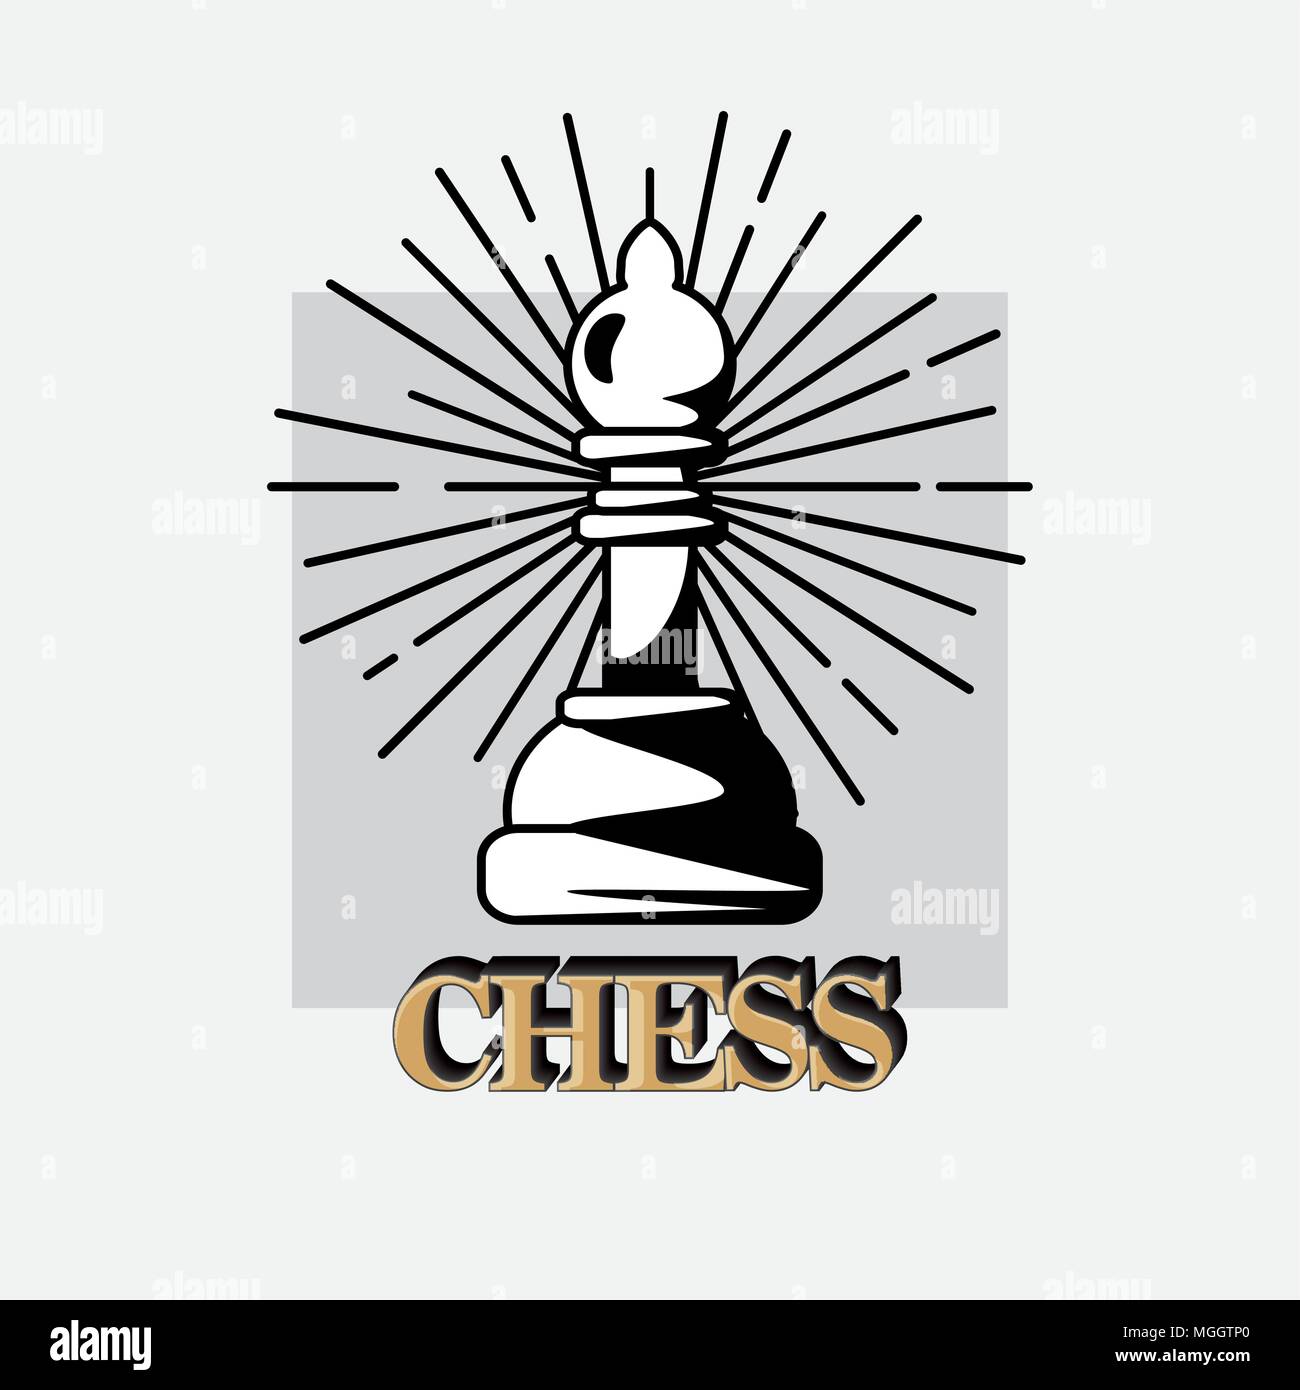 chess design with bishop piece over white background, black and white design. vector illustration Stock Vector